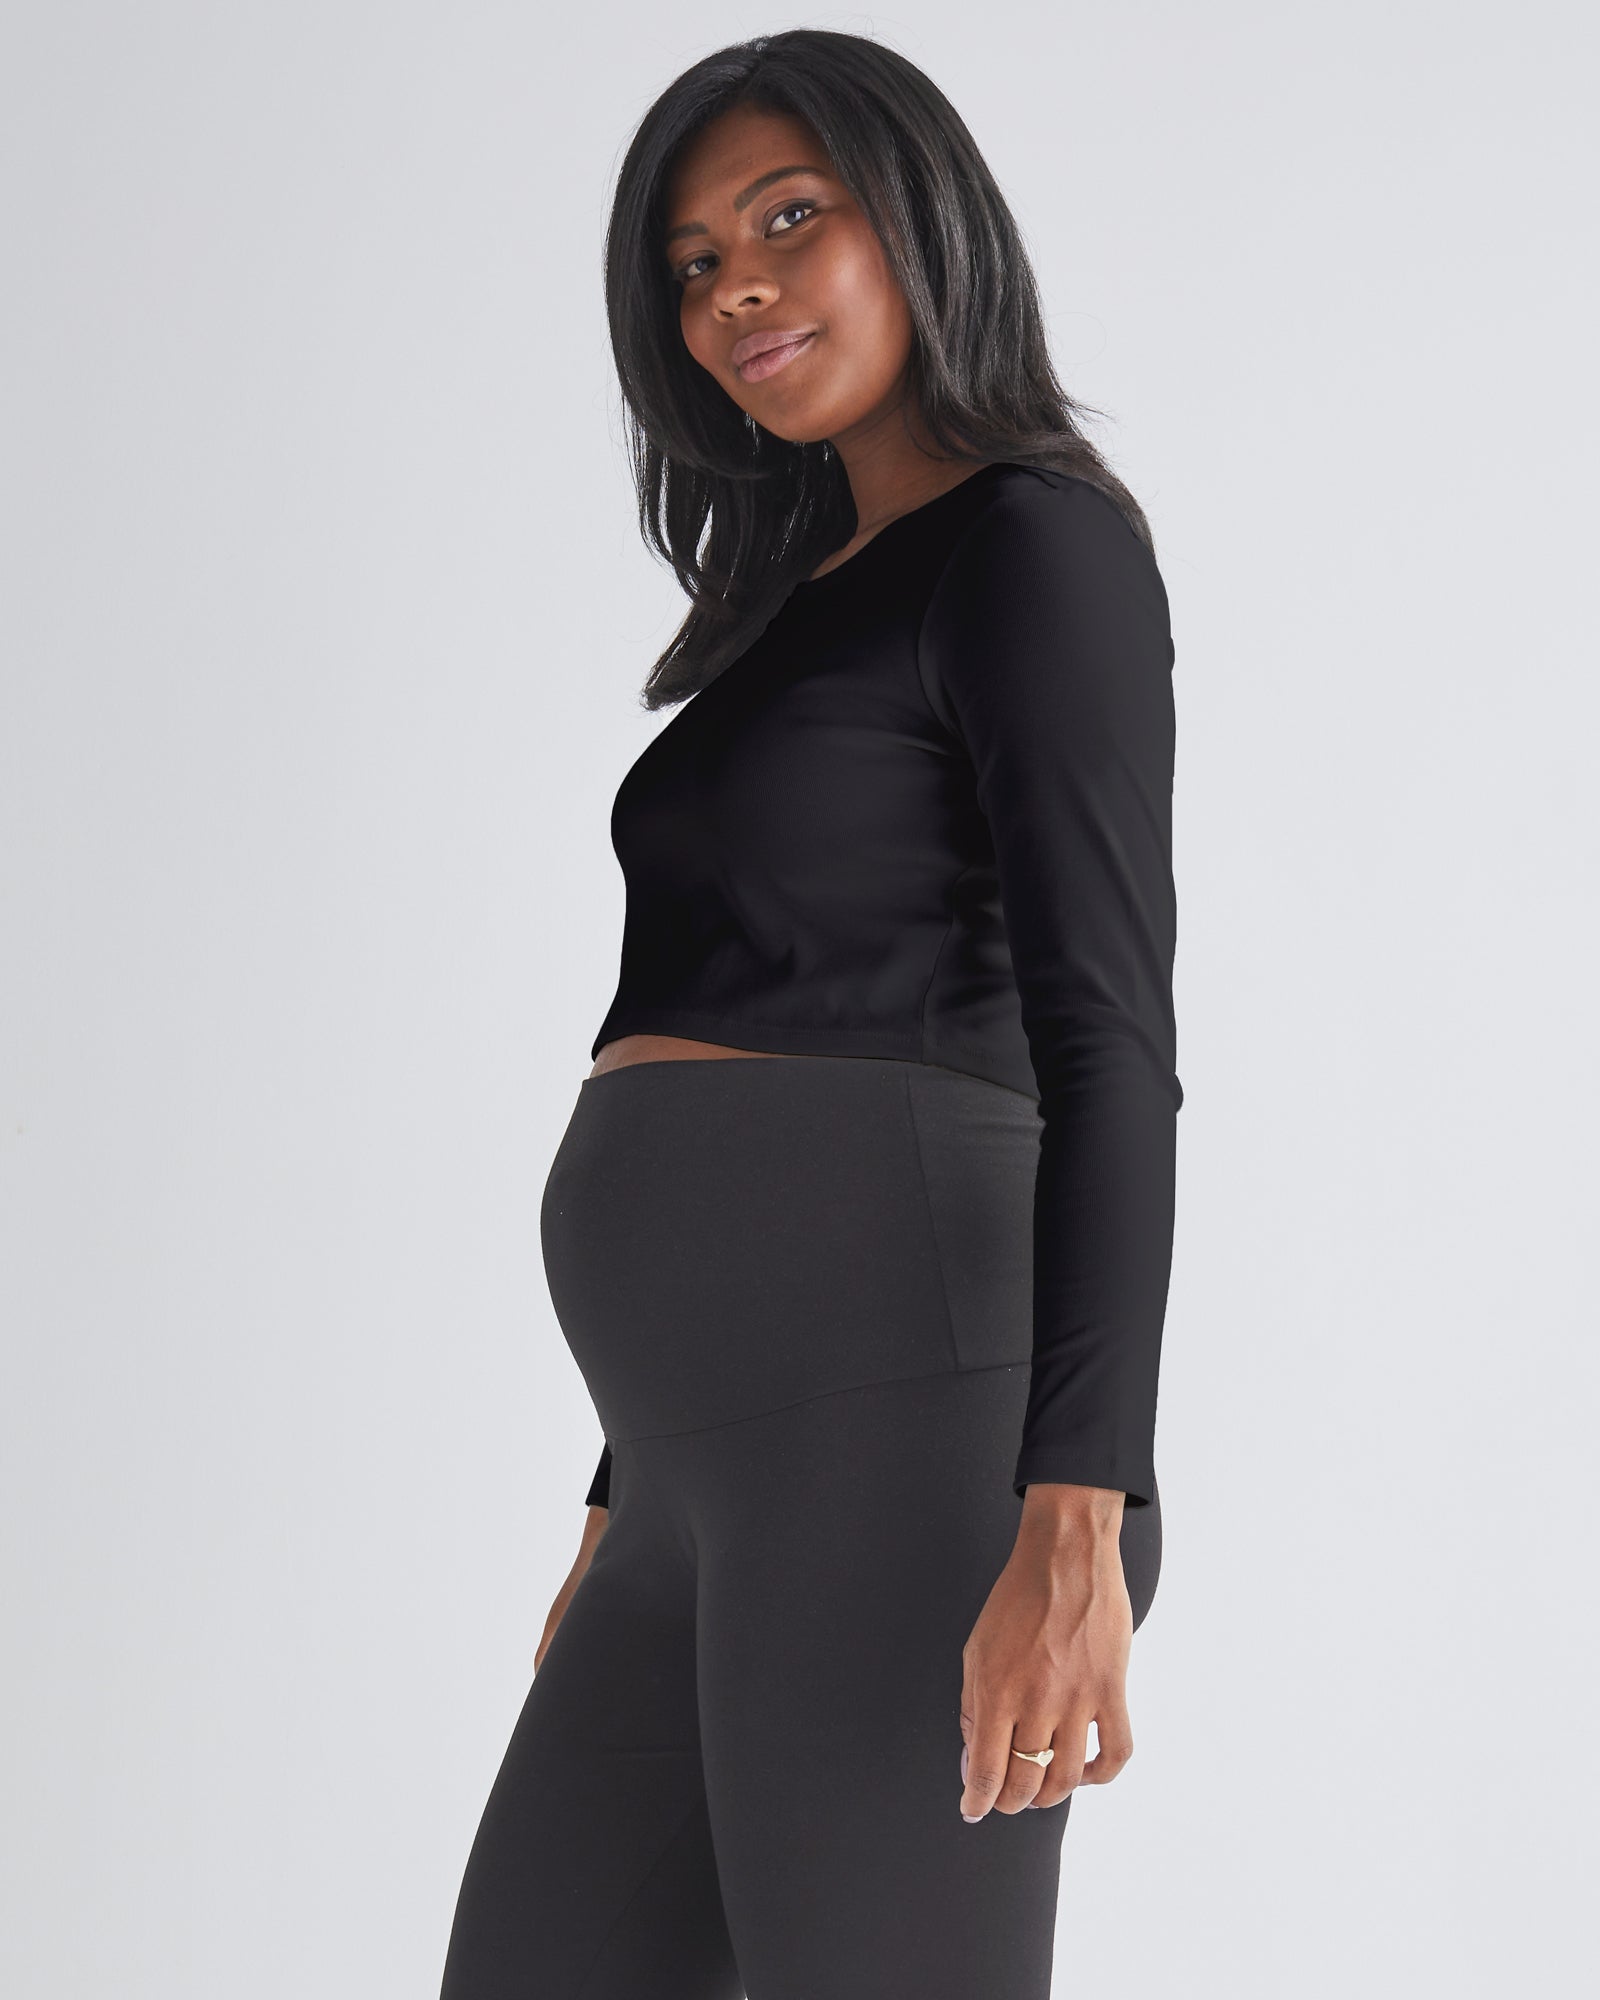 A Pregnant Woman Wearing Long Sleeve Cotton Black Maternity Crop Top from Angel Maternity